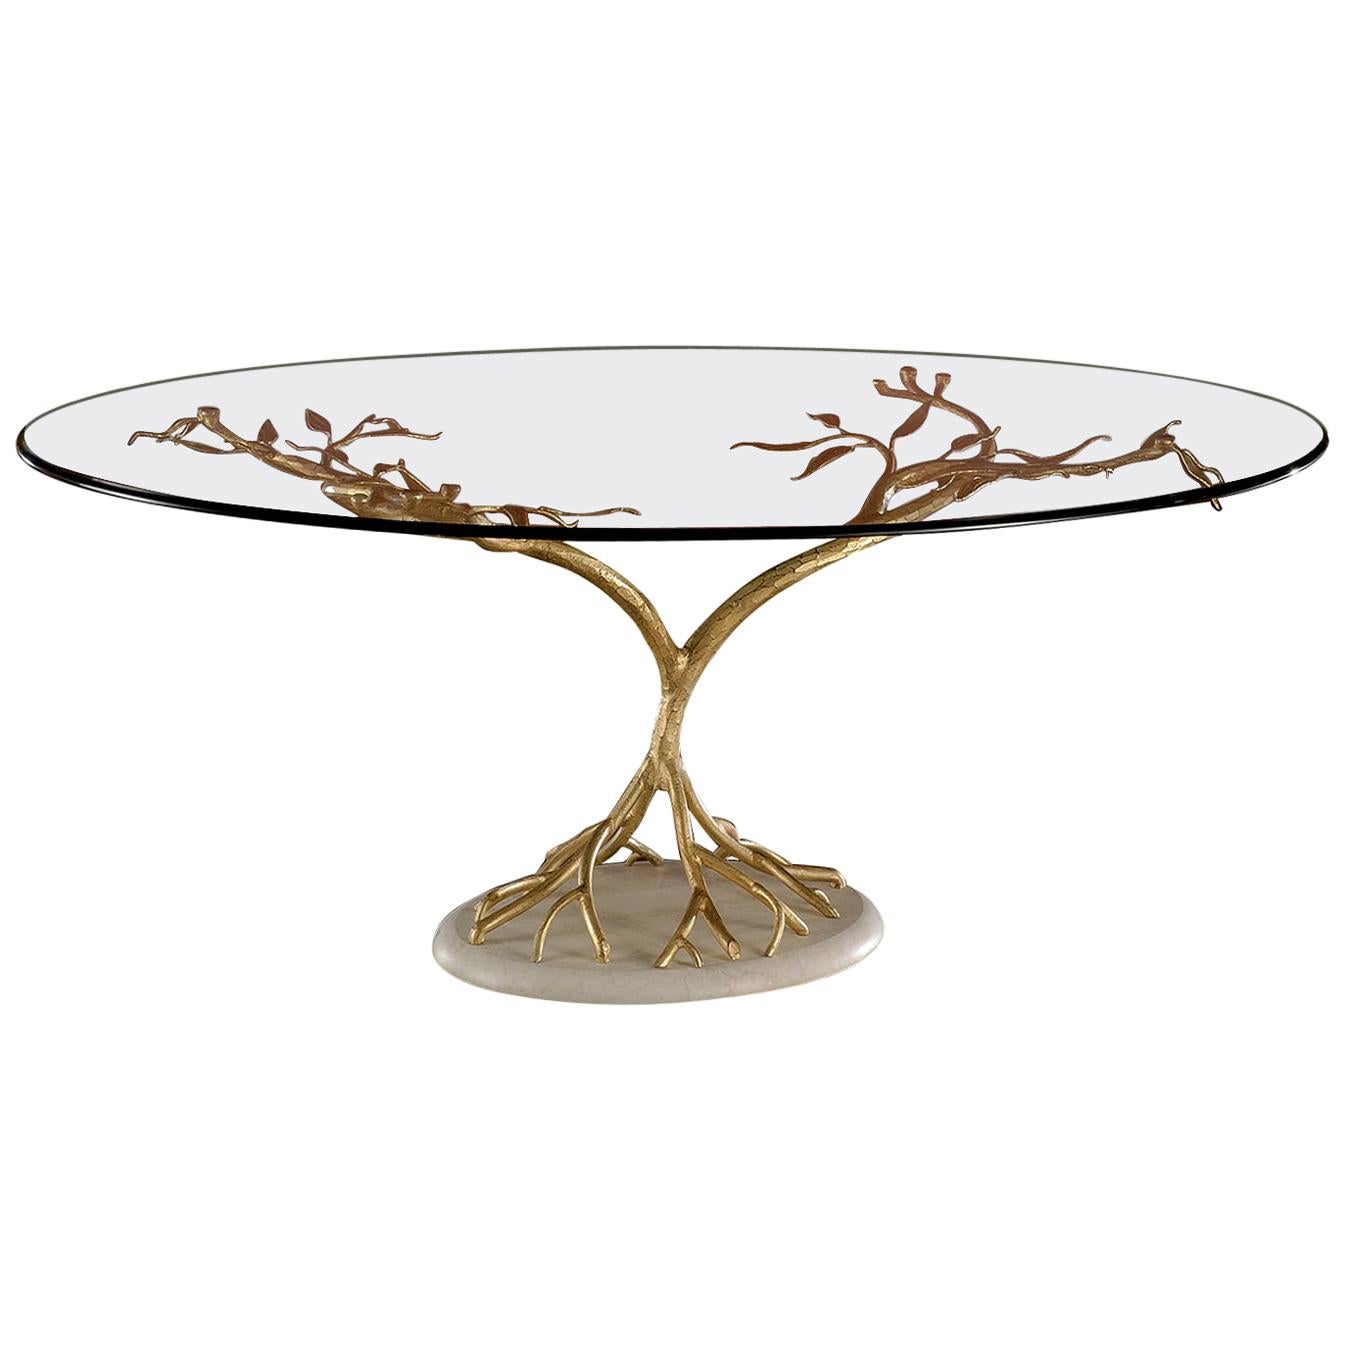 Large Tree-Like Glass Table by Banci